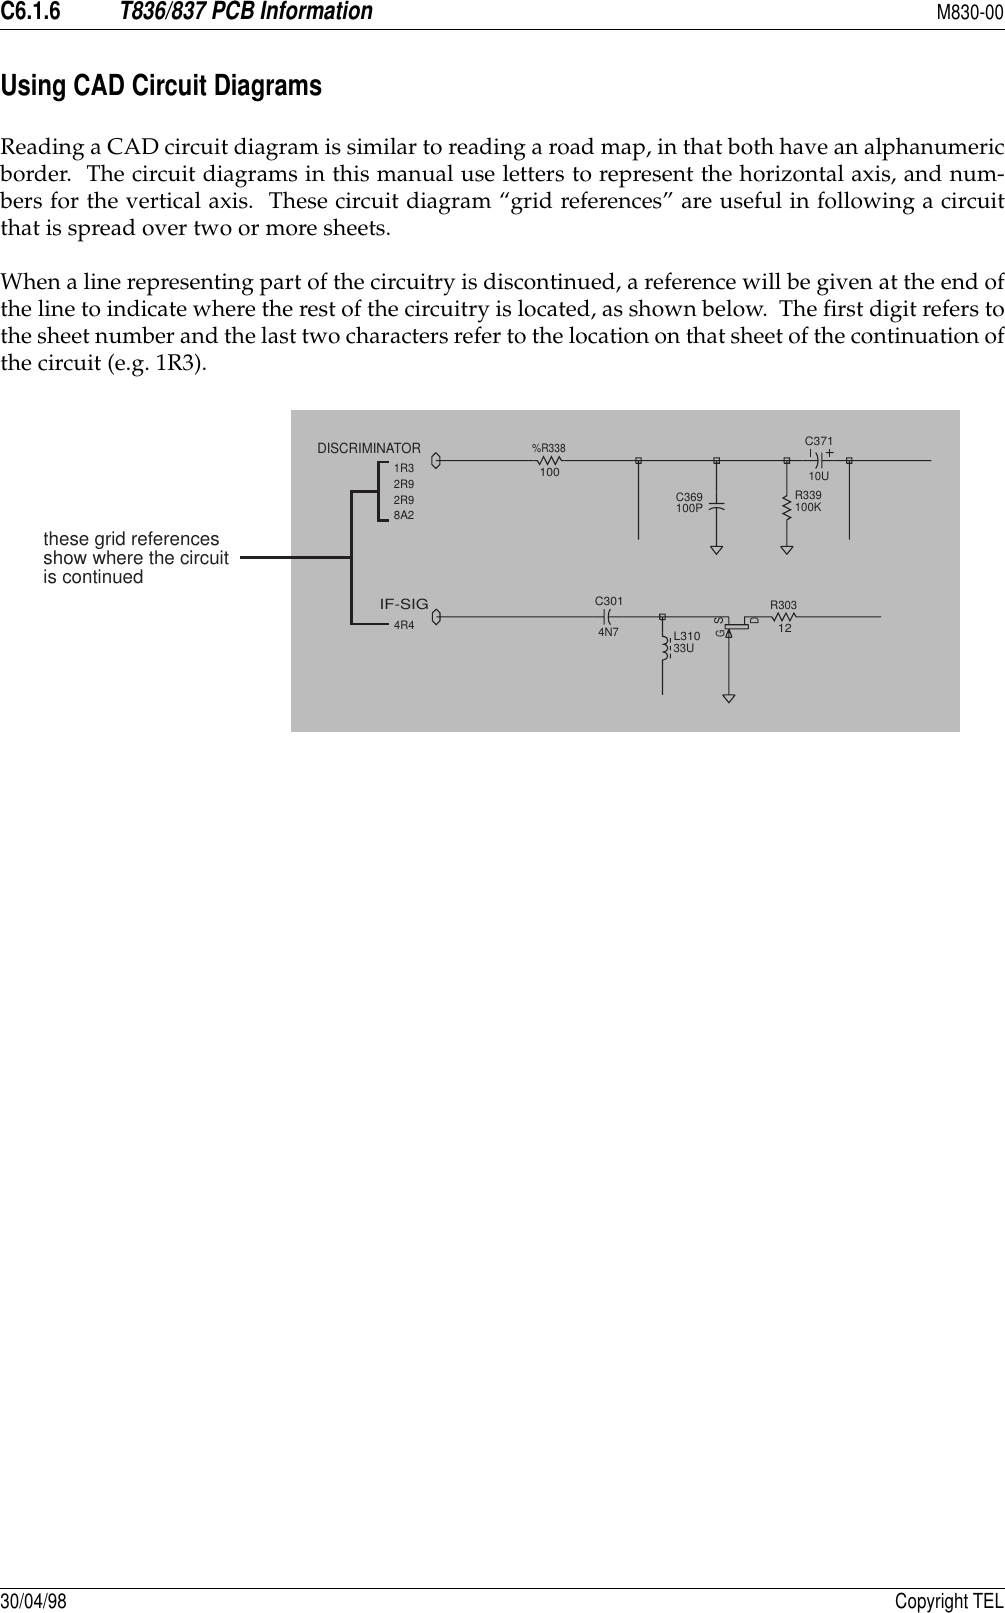 C6.1.6T836/837 PCB InformationM830-0030/04/98 Copyright TELUsing CAD Circuit DiagramsReading a CAD circuit diagram is similar to reading a road map, in that both have an alphanumericborder.  The circuit diagrams in this manual use letters to represent the horizontal axis, and num-bers for the vertical axis.  These circuit diagram “grid references” are useful in following a circuitthat is spread over two or more sheets.When a line representing part of the circuitry is discontinued, a reference will be given at the end ofthe line to indicate where the rest of the circuitry is located, as shown below.  The first digit refers tothe sheet number and the last two characters refer to the location on that sheet of the continuation ofthe circuit (e.g. 1R3).C3014N7R30312DSGL31033UIF-SIG4R4C369100PC37110UR339100K%R338100DISCRIMINATOR1R32R92R98A2these grid referencesshow where the circuitis continued